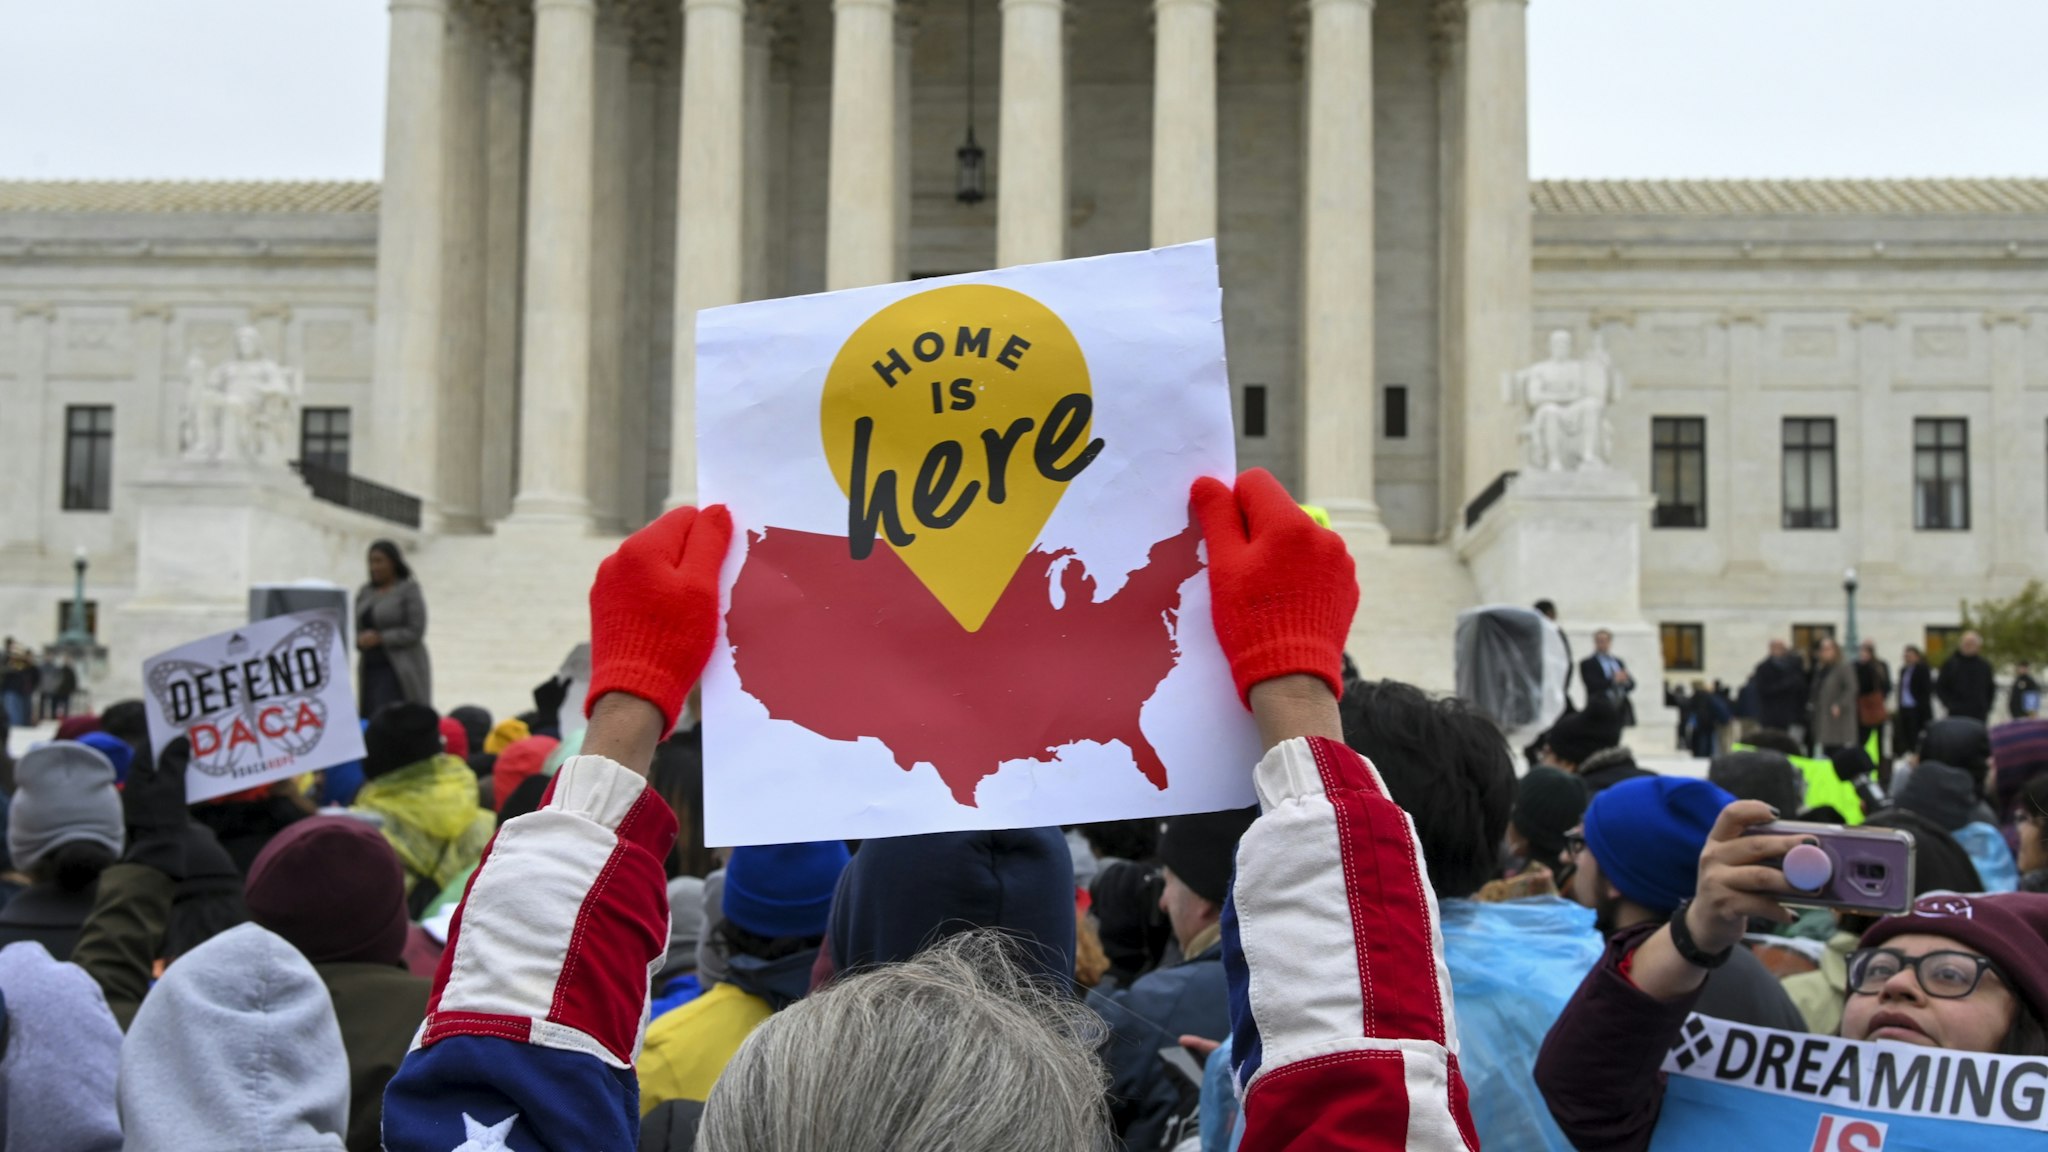 WASHINGTON, DC - NOVEMBER 12: Demonstrators gather in front of the United States Supreme Court, where the Court is hearing arguments on Deferred Action for Childhood Arrivals - DACA - that could impact the fates of nearly 700,000 "dreamers" brought to the United States as undocumented children, on Tuesday, November 12, 2019, in Washington, DC. The Donald Trump administration has tried for more than two years to wind down the Deferred Action for Childhood Arrivals (DACA) program, announced by President Barack Obama in 2012 to protect from deportation qualified young immigrants who came to the country illegally. (Photo by Jahi Chikwendiu/The Washington Post via Getty Images)